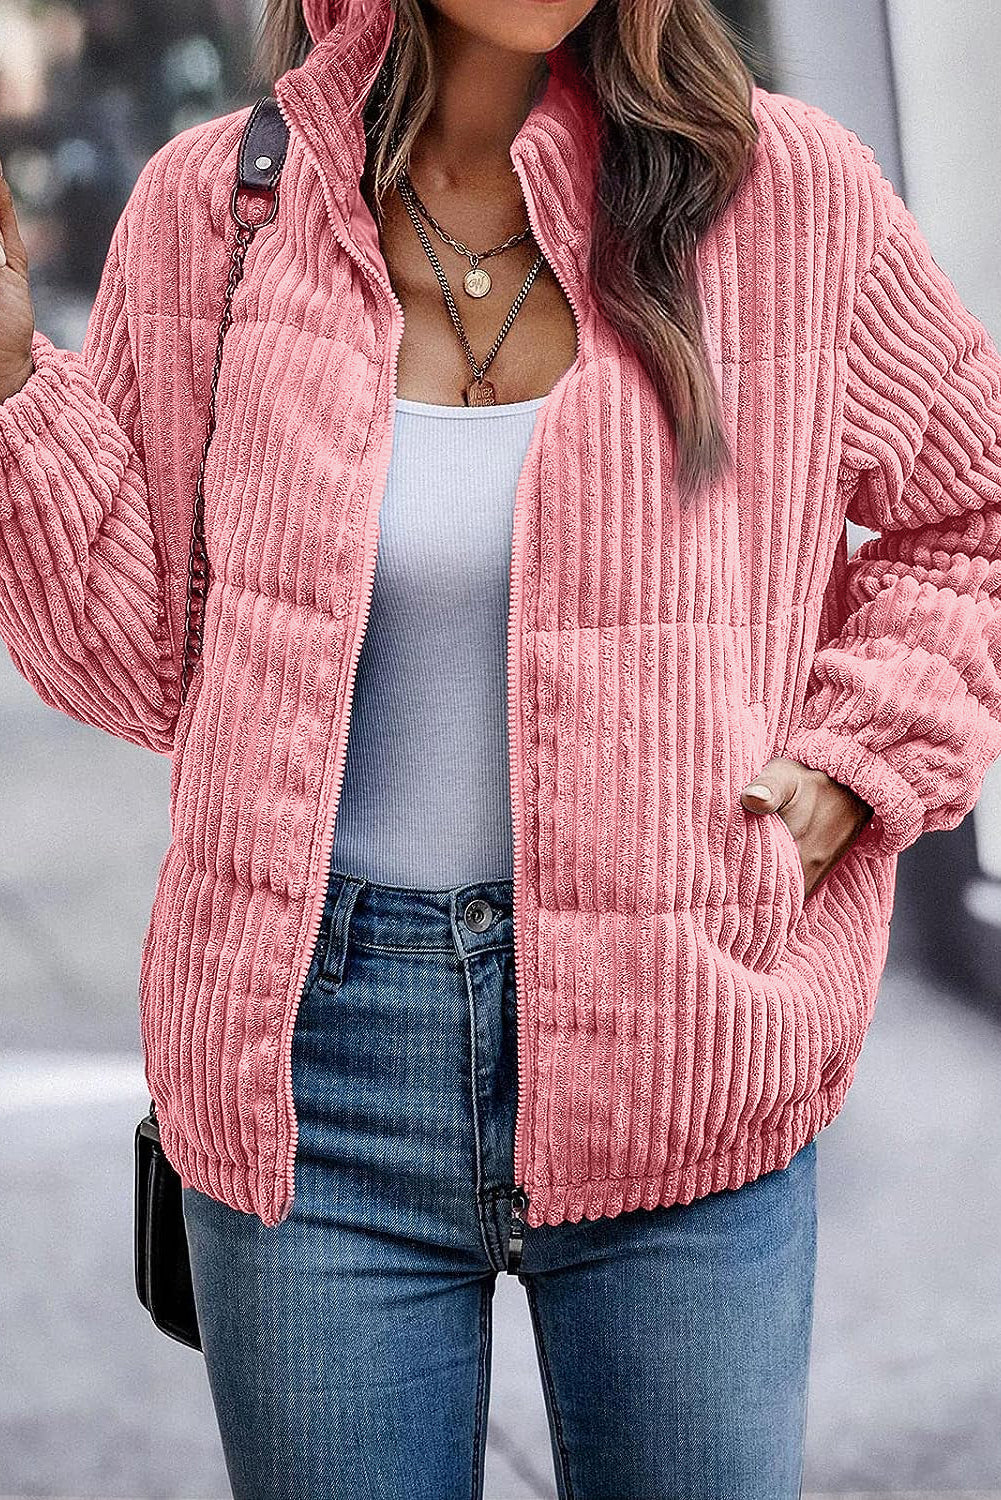 blossom corduroy puffer jacket - only large left!